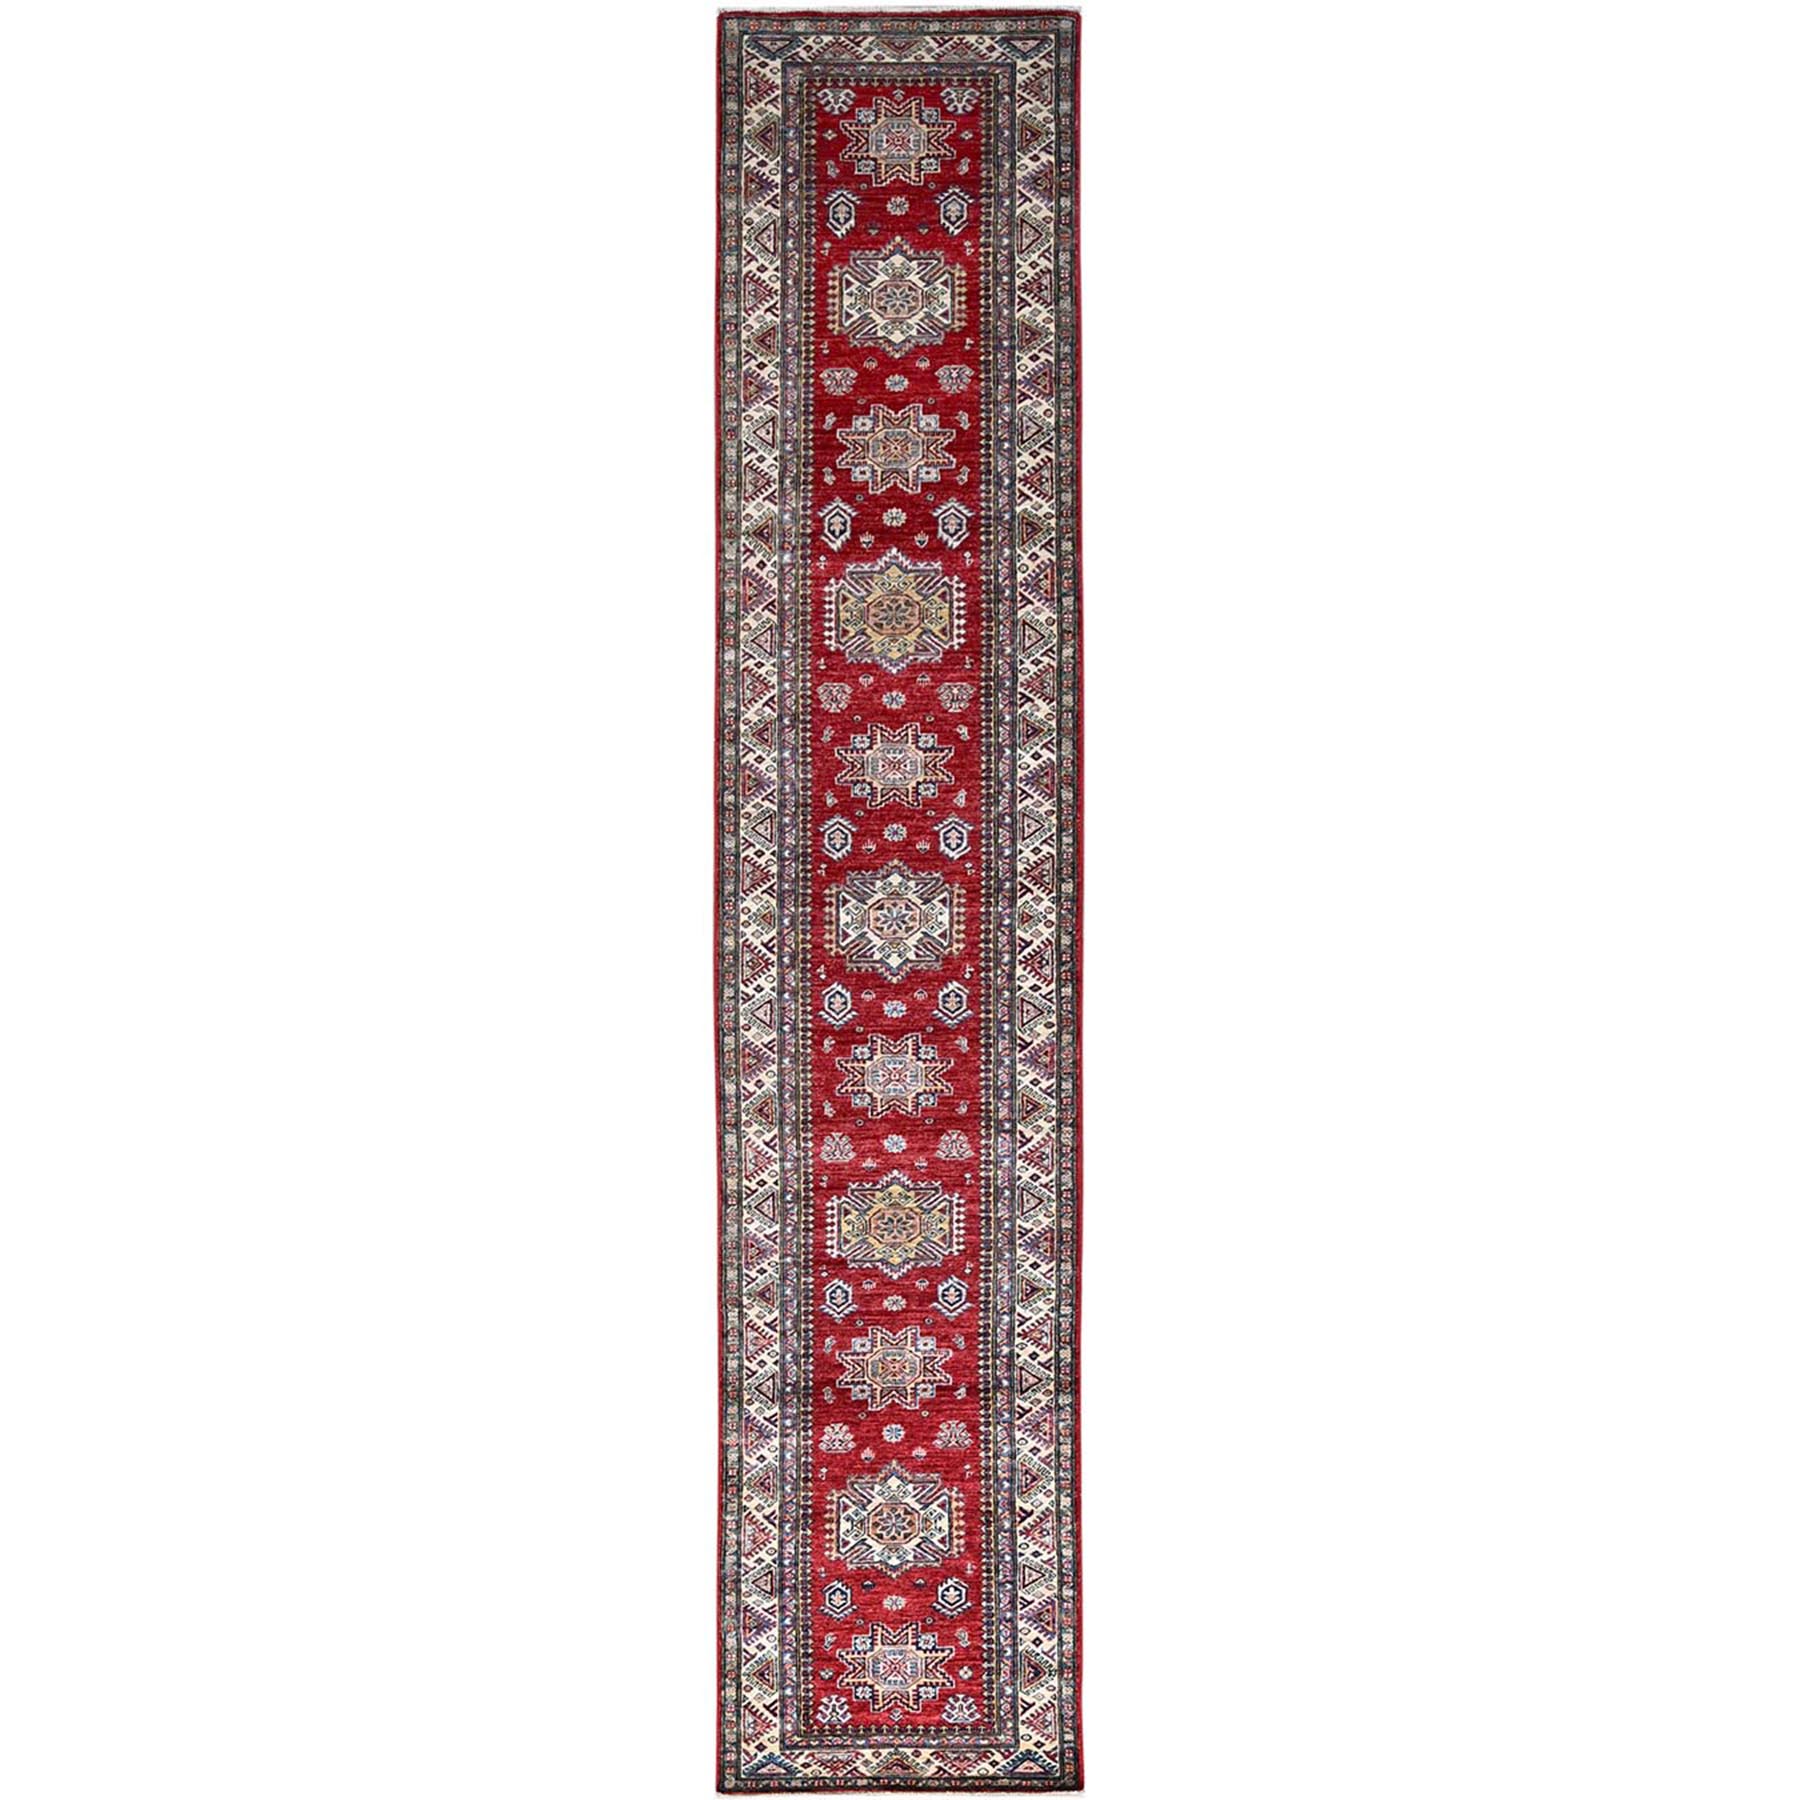 Carmine Red, Afghan Super Kazak with Geometric Medallions Design, Natural Dyes, Densely Woven, Soft and Shiny Wool, Hand Knotted, Runner Oriental Rug